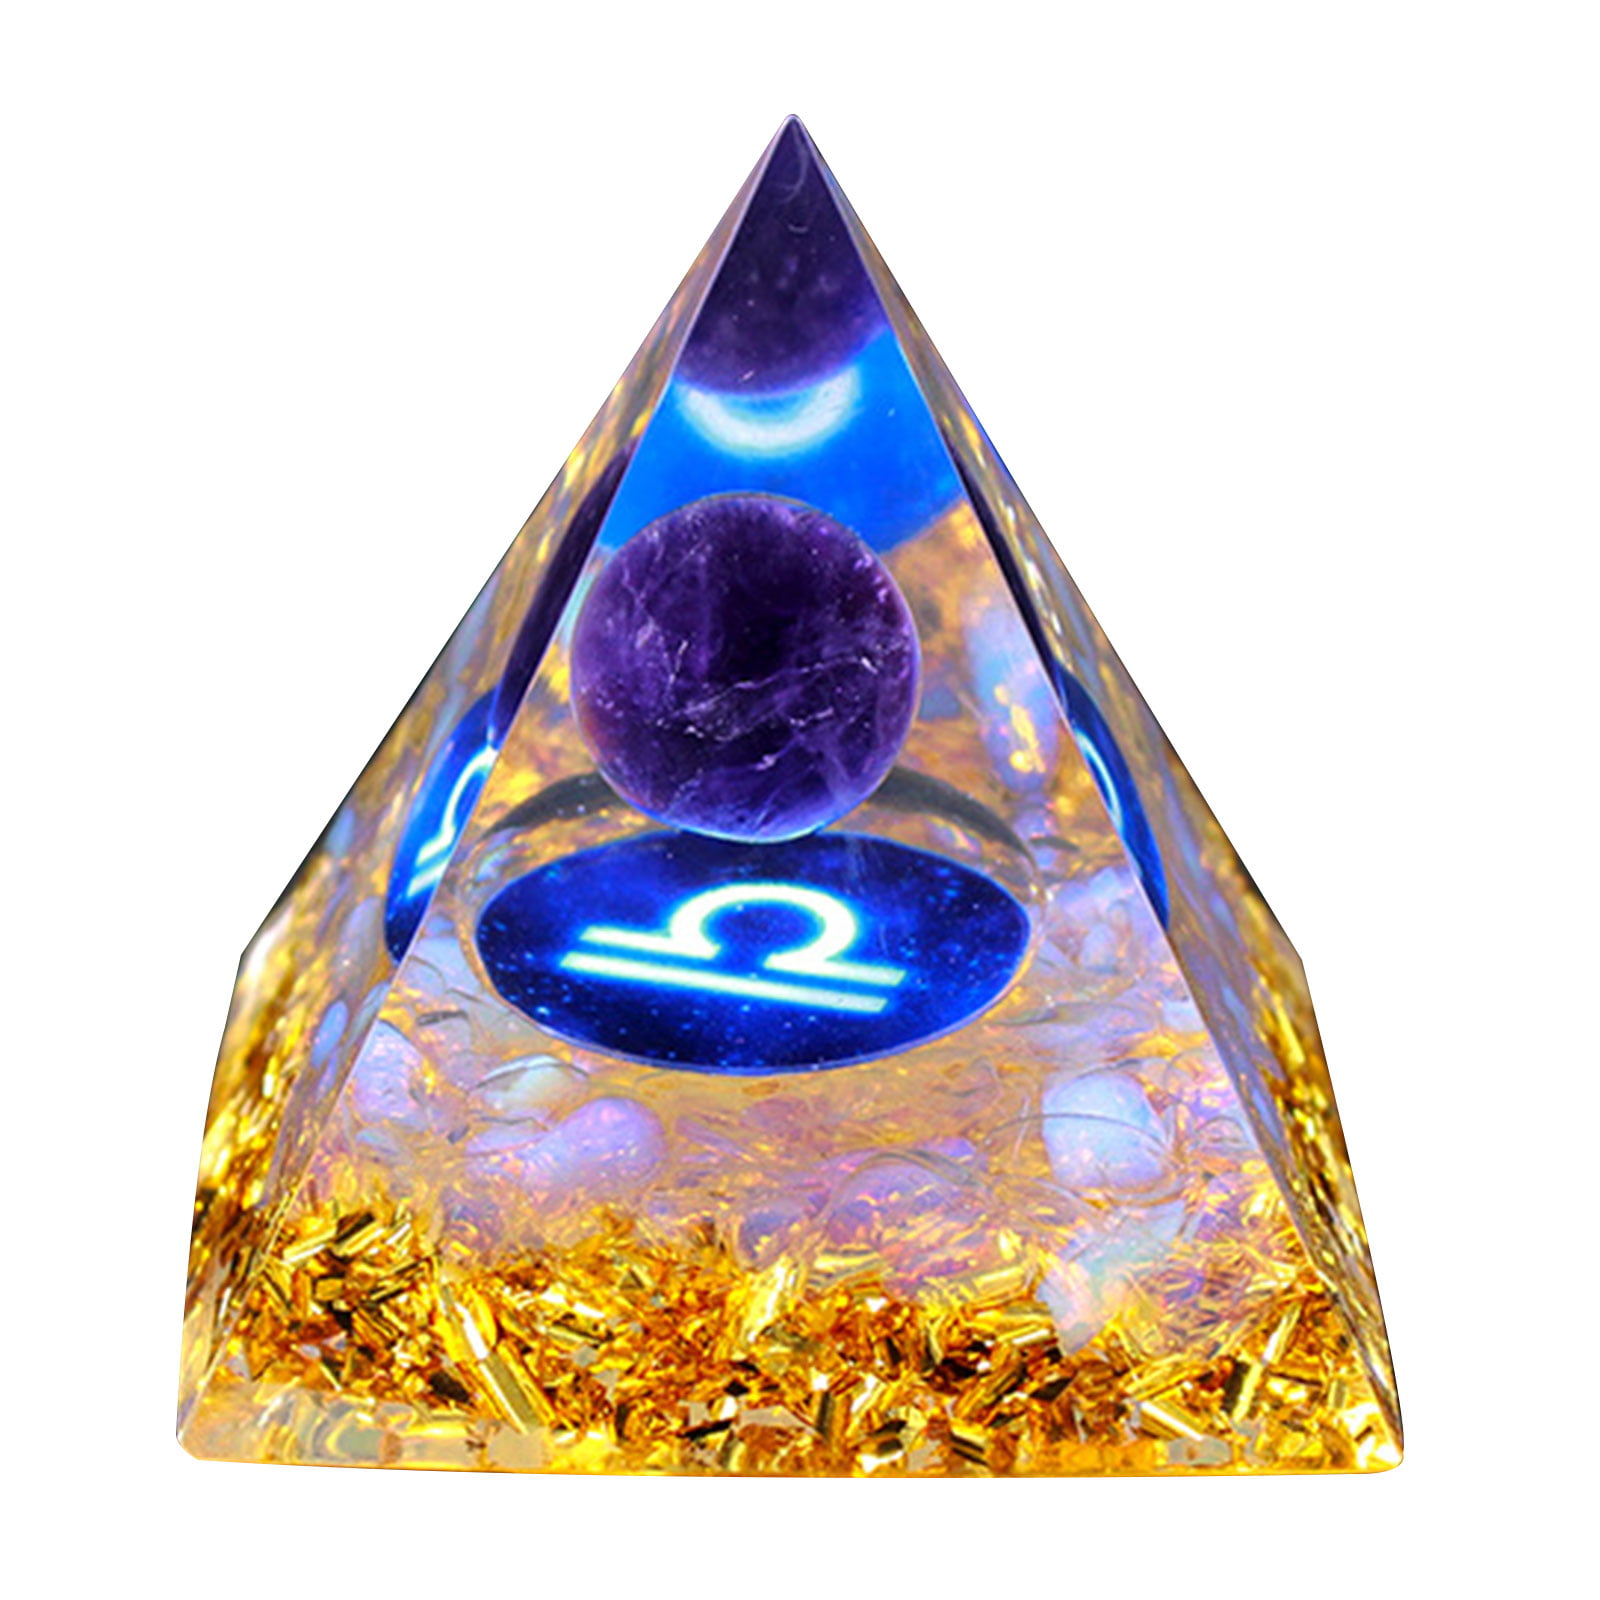 Double Pyramid in a Pyramid Crystal Choice of Sizes New Age Reiki Chakra Healing 